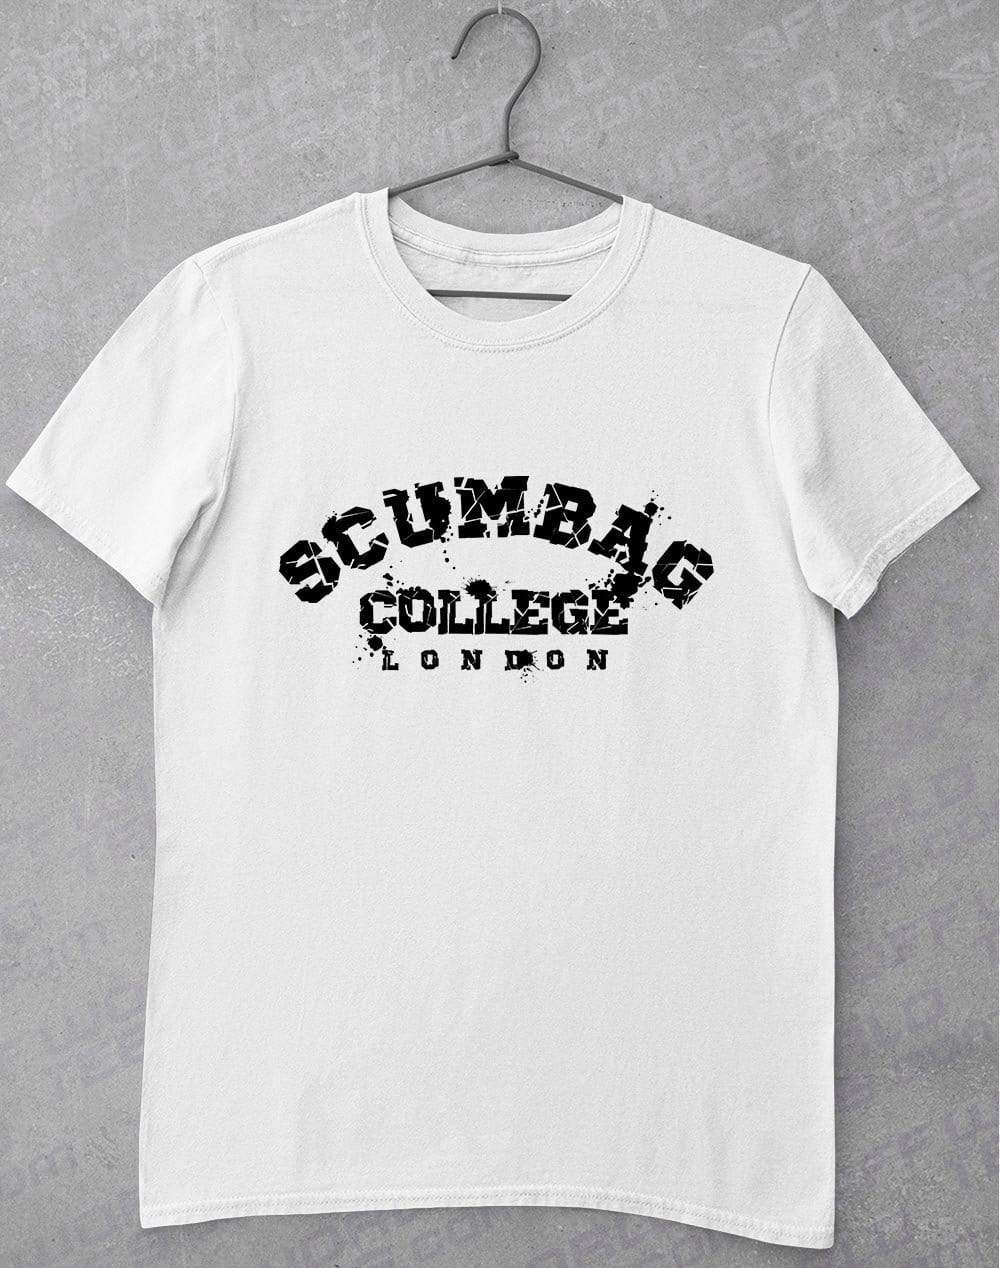 Scumbag College T-Shirt S / White  - Off World Tees